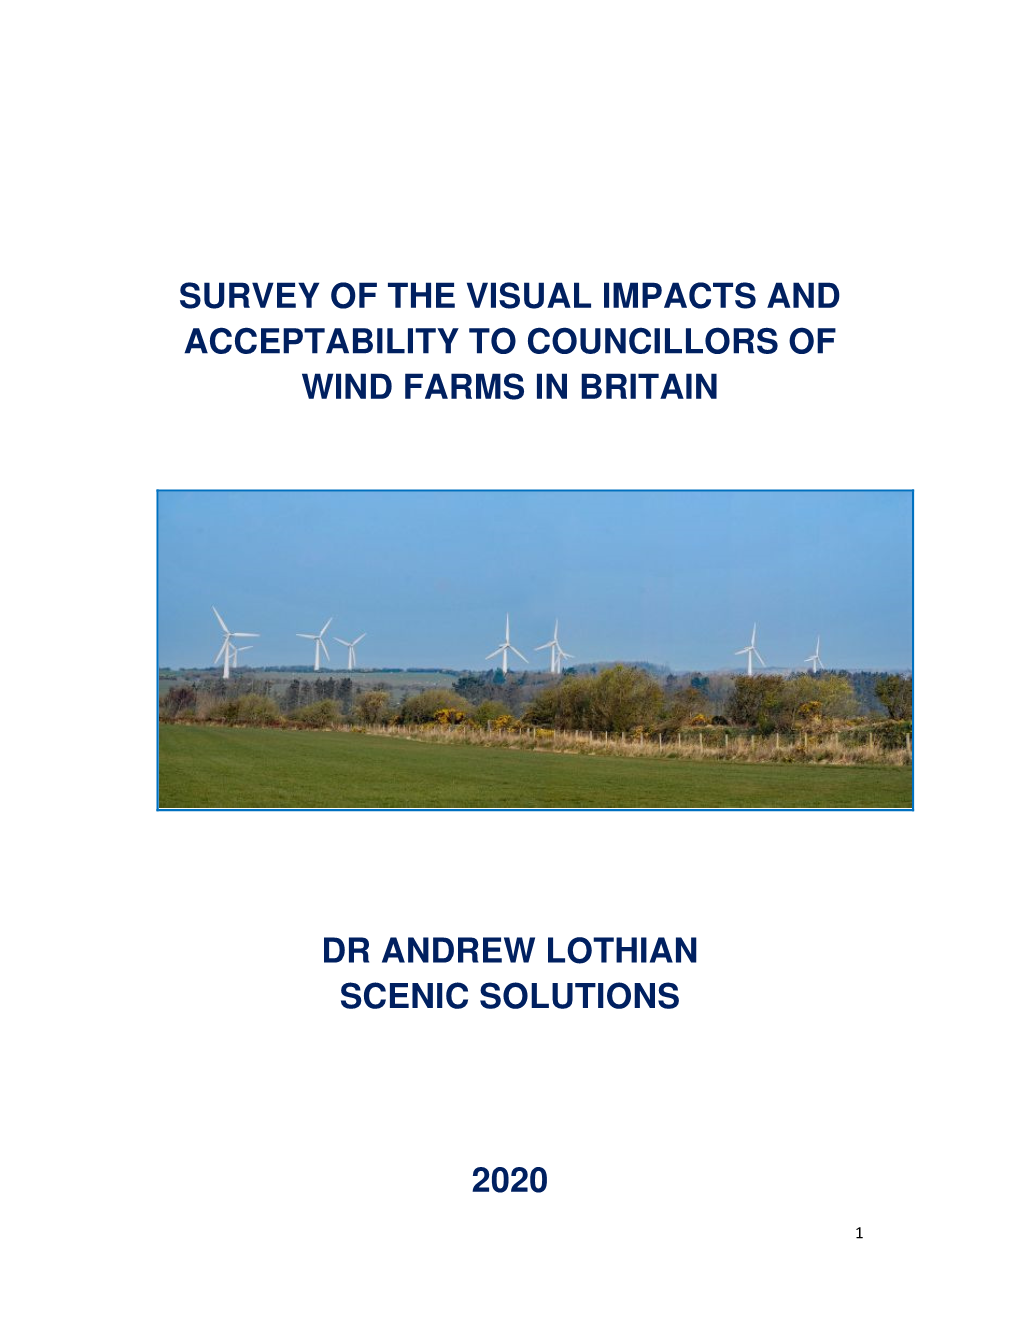 Survey of the Visual Impacts and Acceptability to Councillors of Wind Farms in Britain Dr Andrew Lothian Scenic Solutions 2020